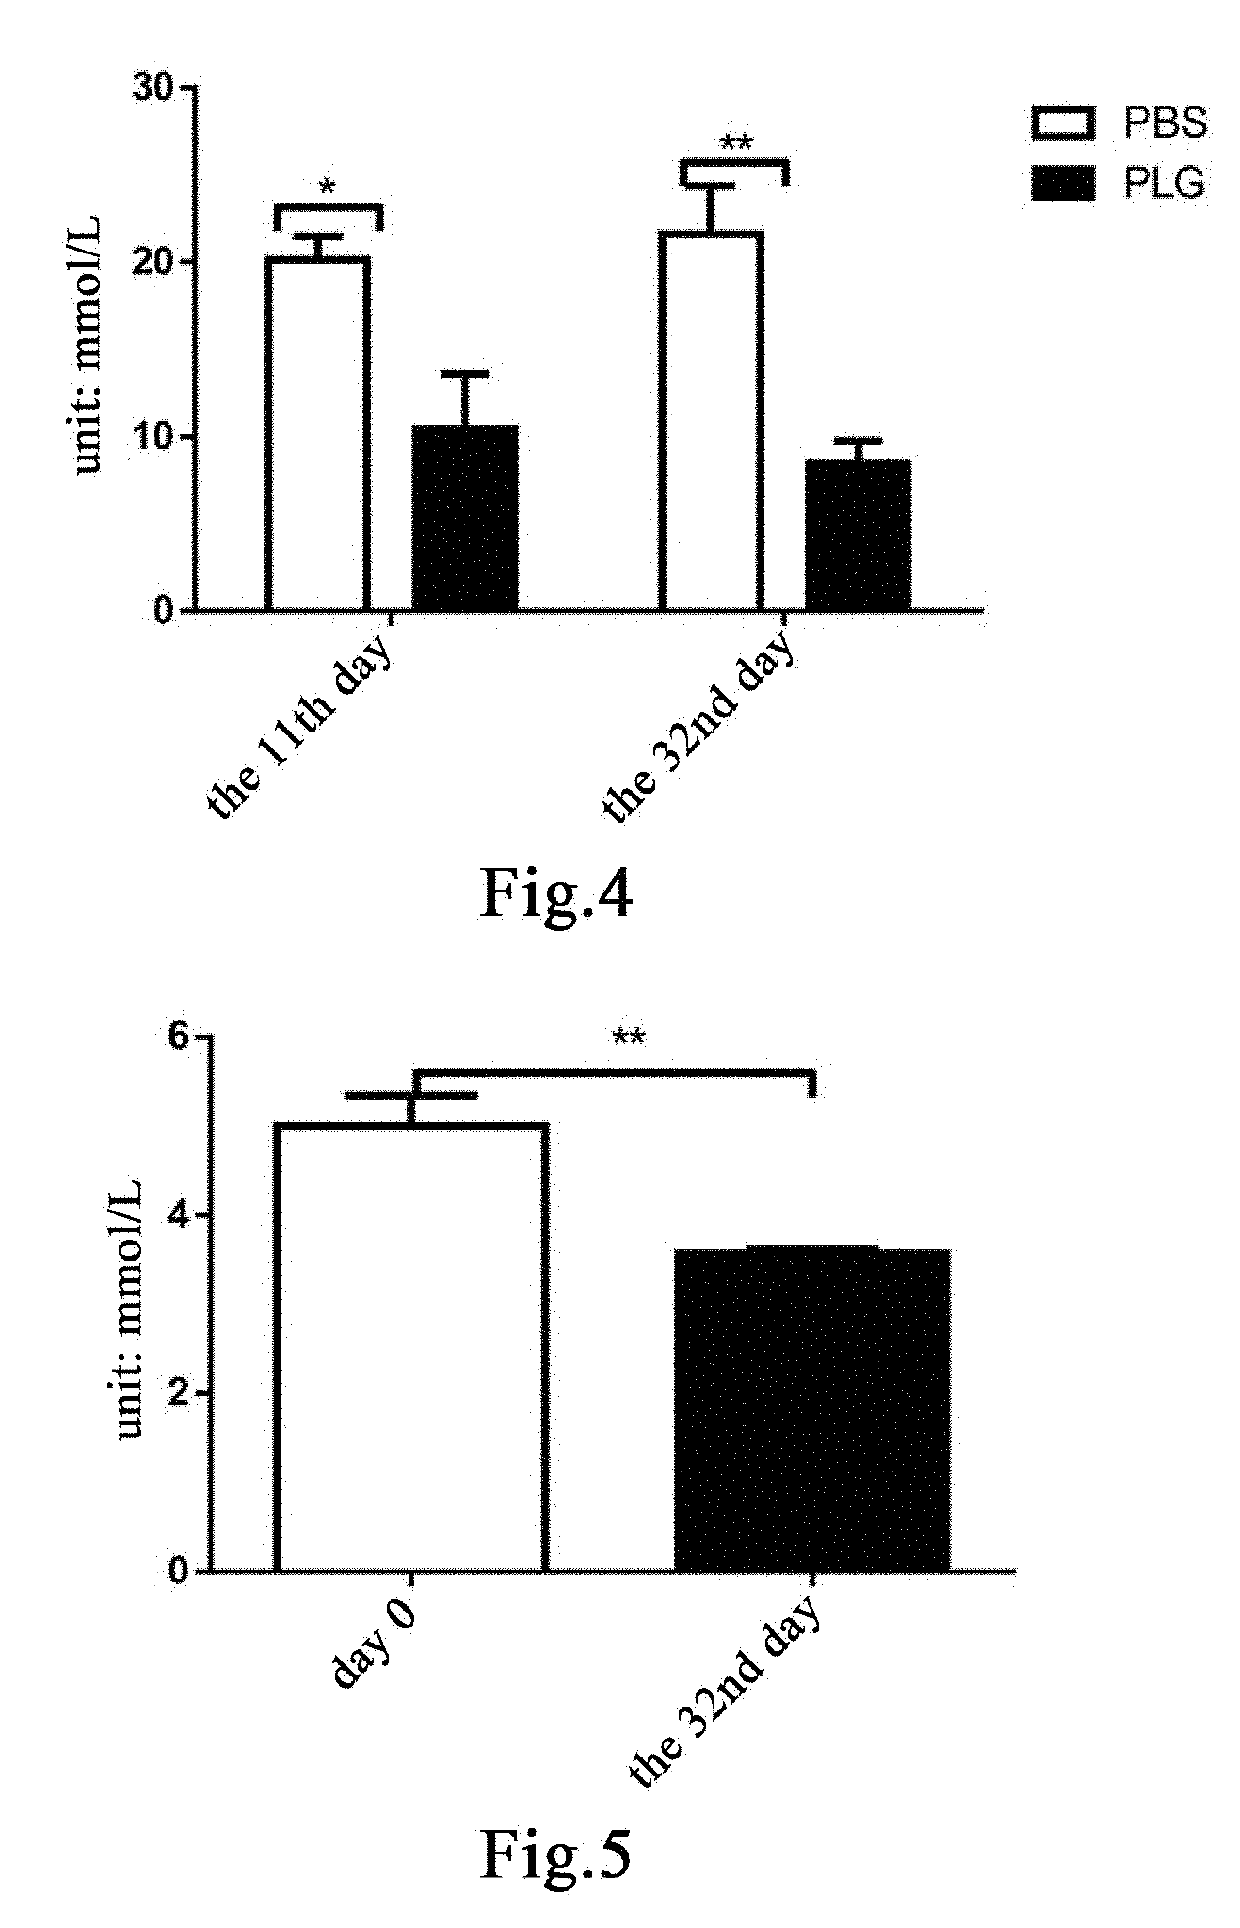 Method for making glucagon and insulin restore normal balance